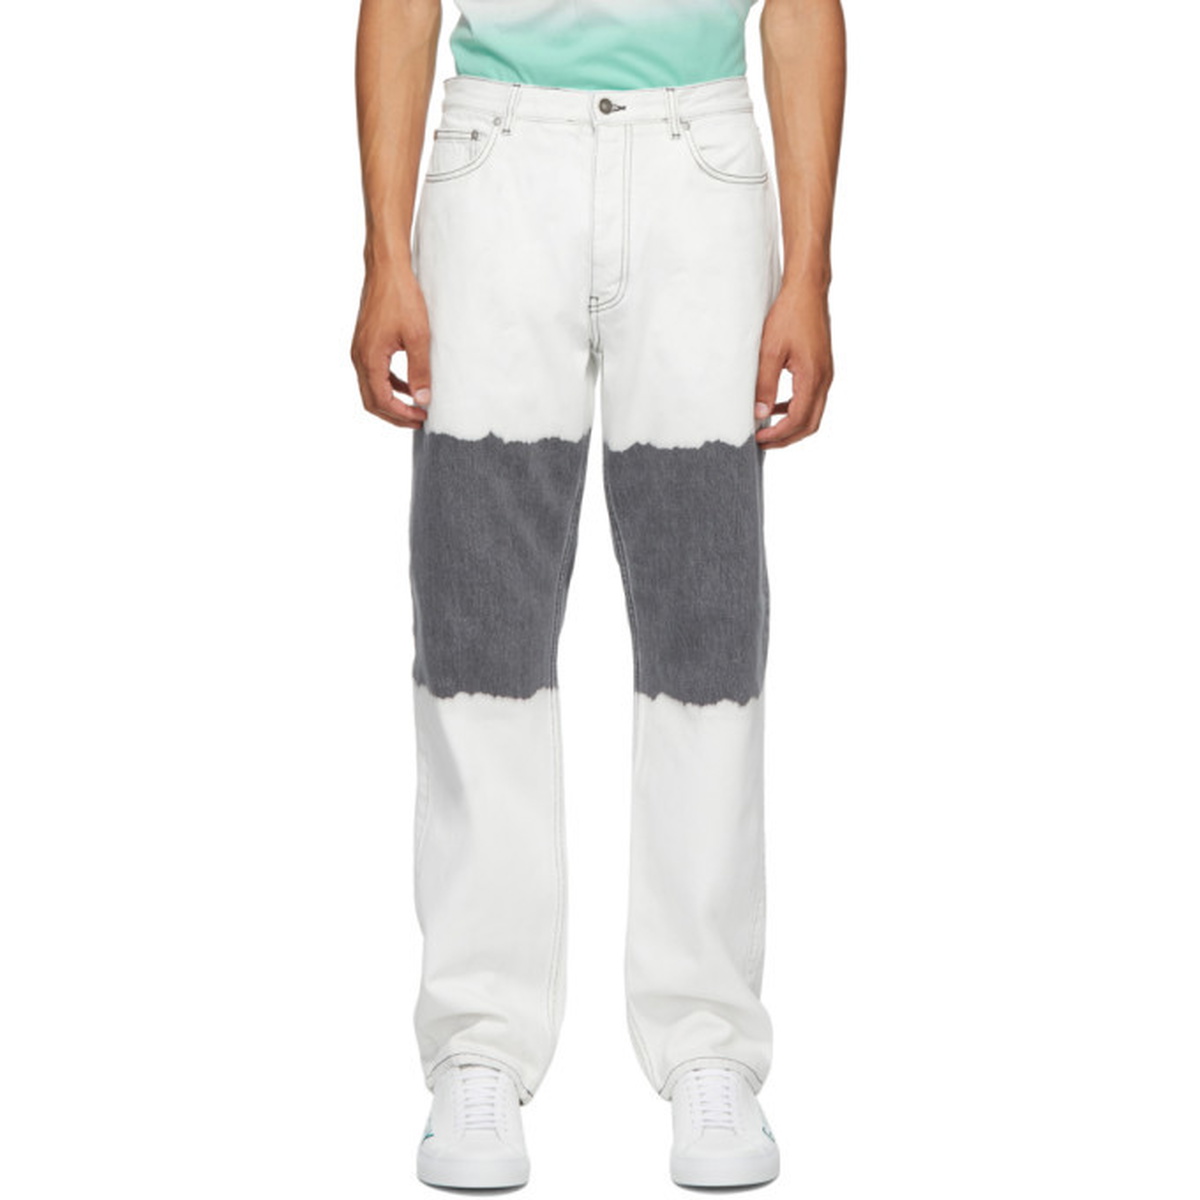 Givenchy Black and White Two-Tone Jeans Givenchy